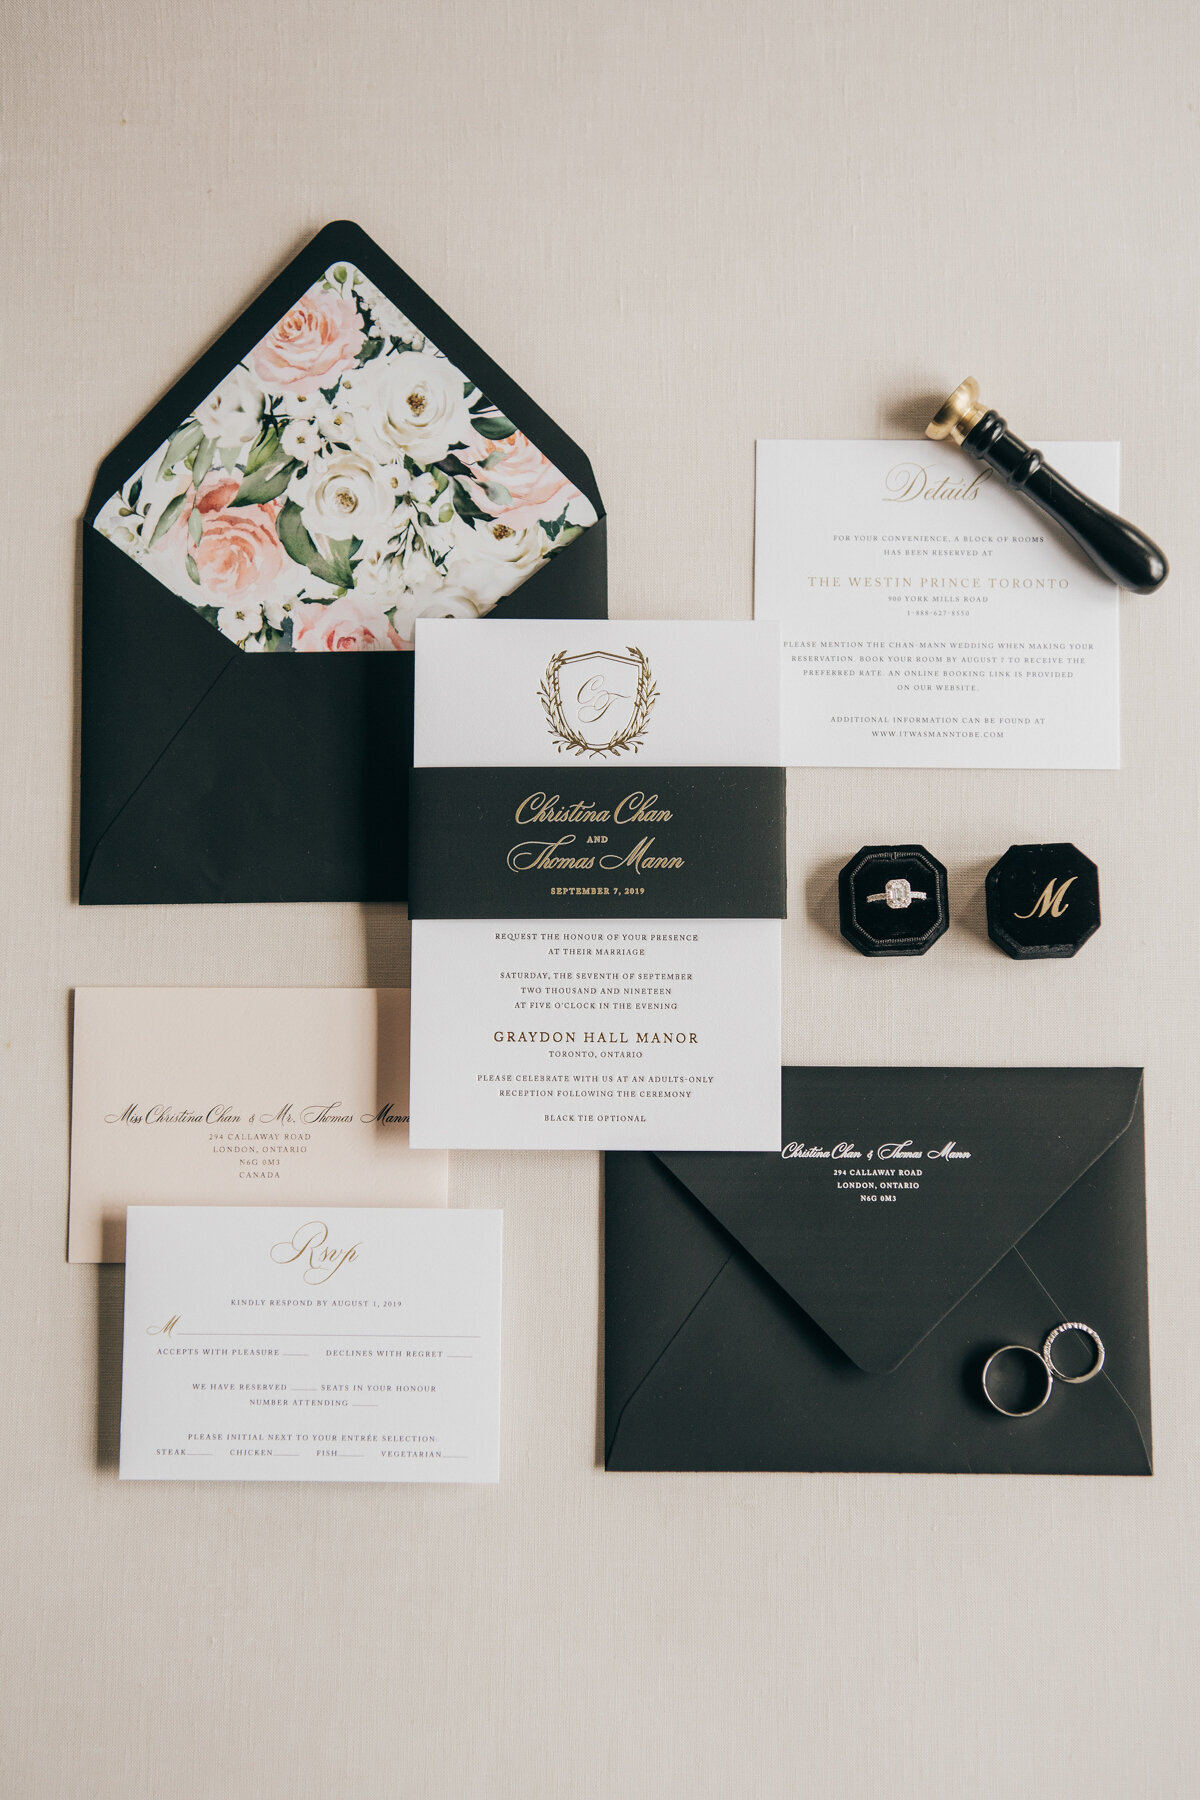 Detail shot of luxurious black and gold wedding invitations and wedding bands